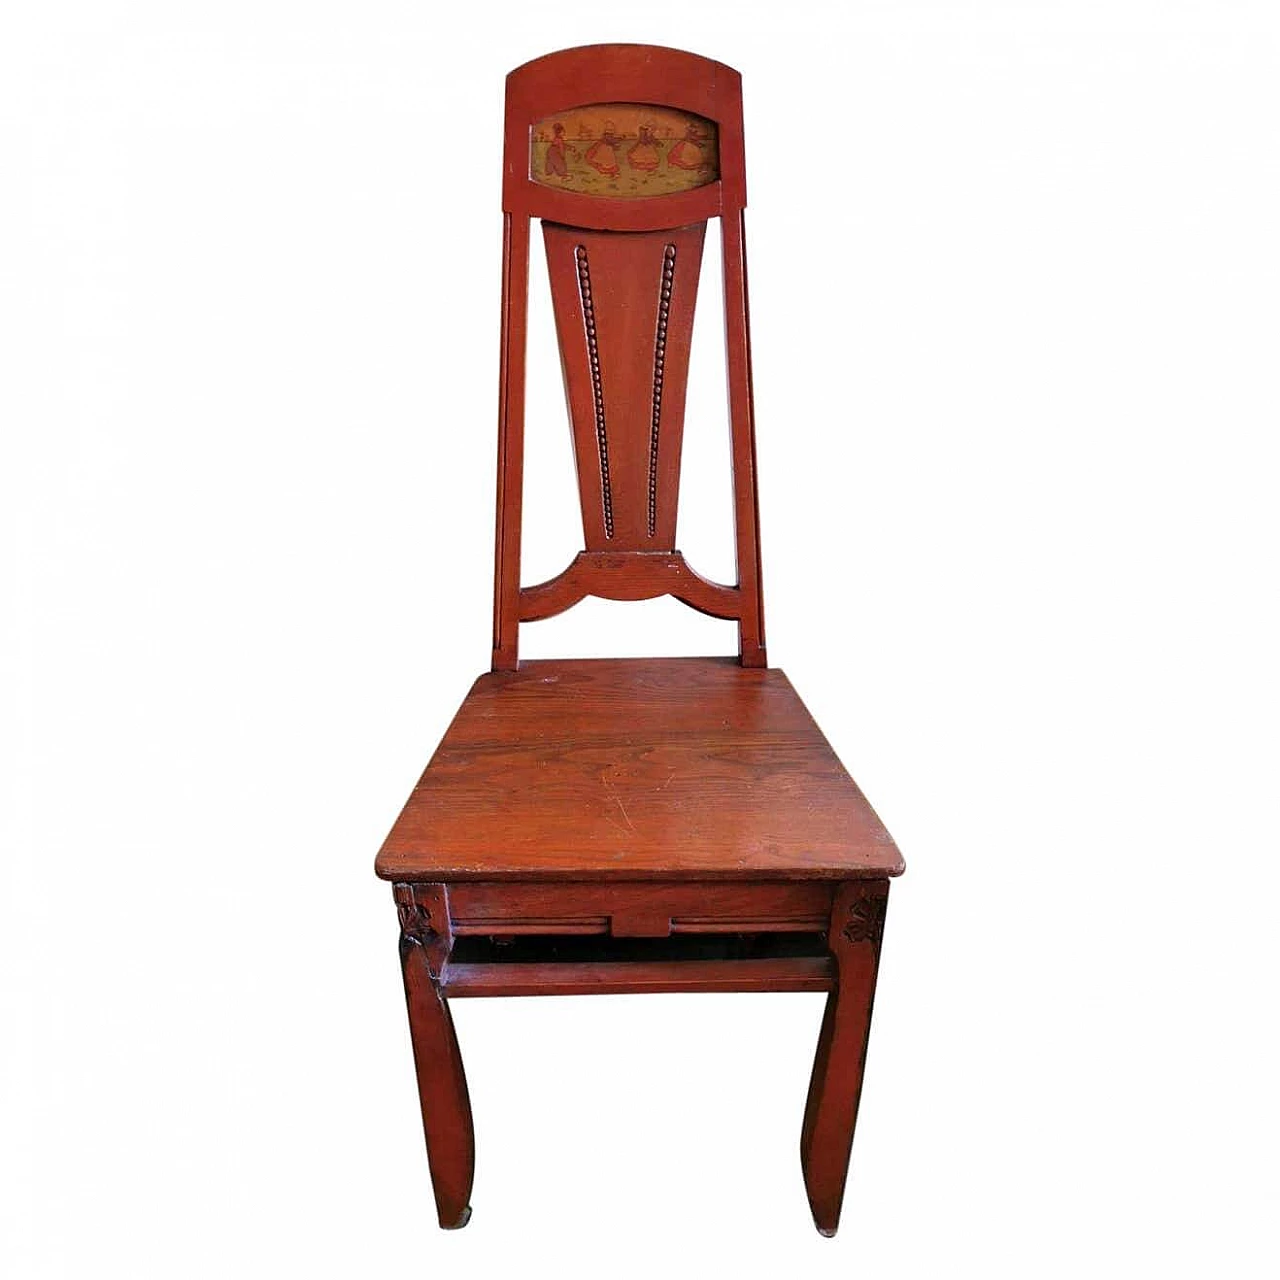 Art deco oak chair with painted panel, 1920s 1367462